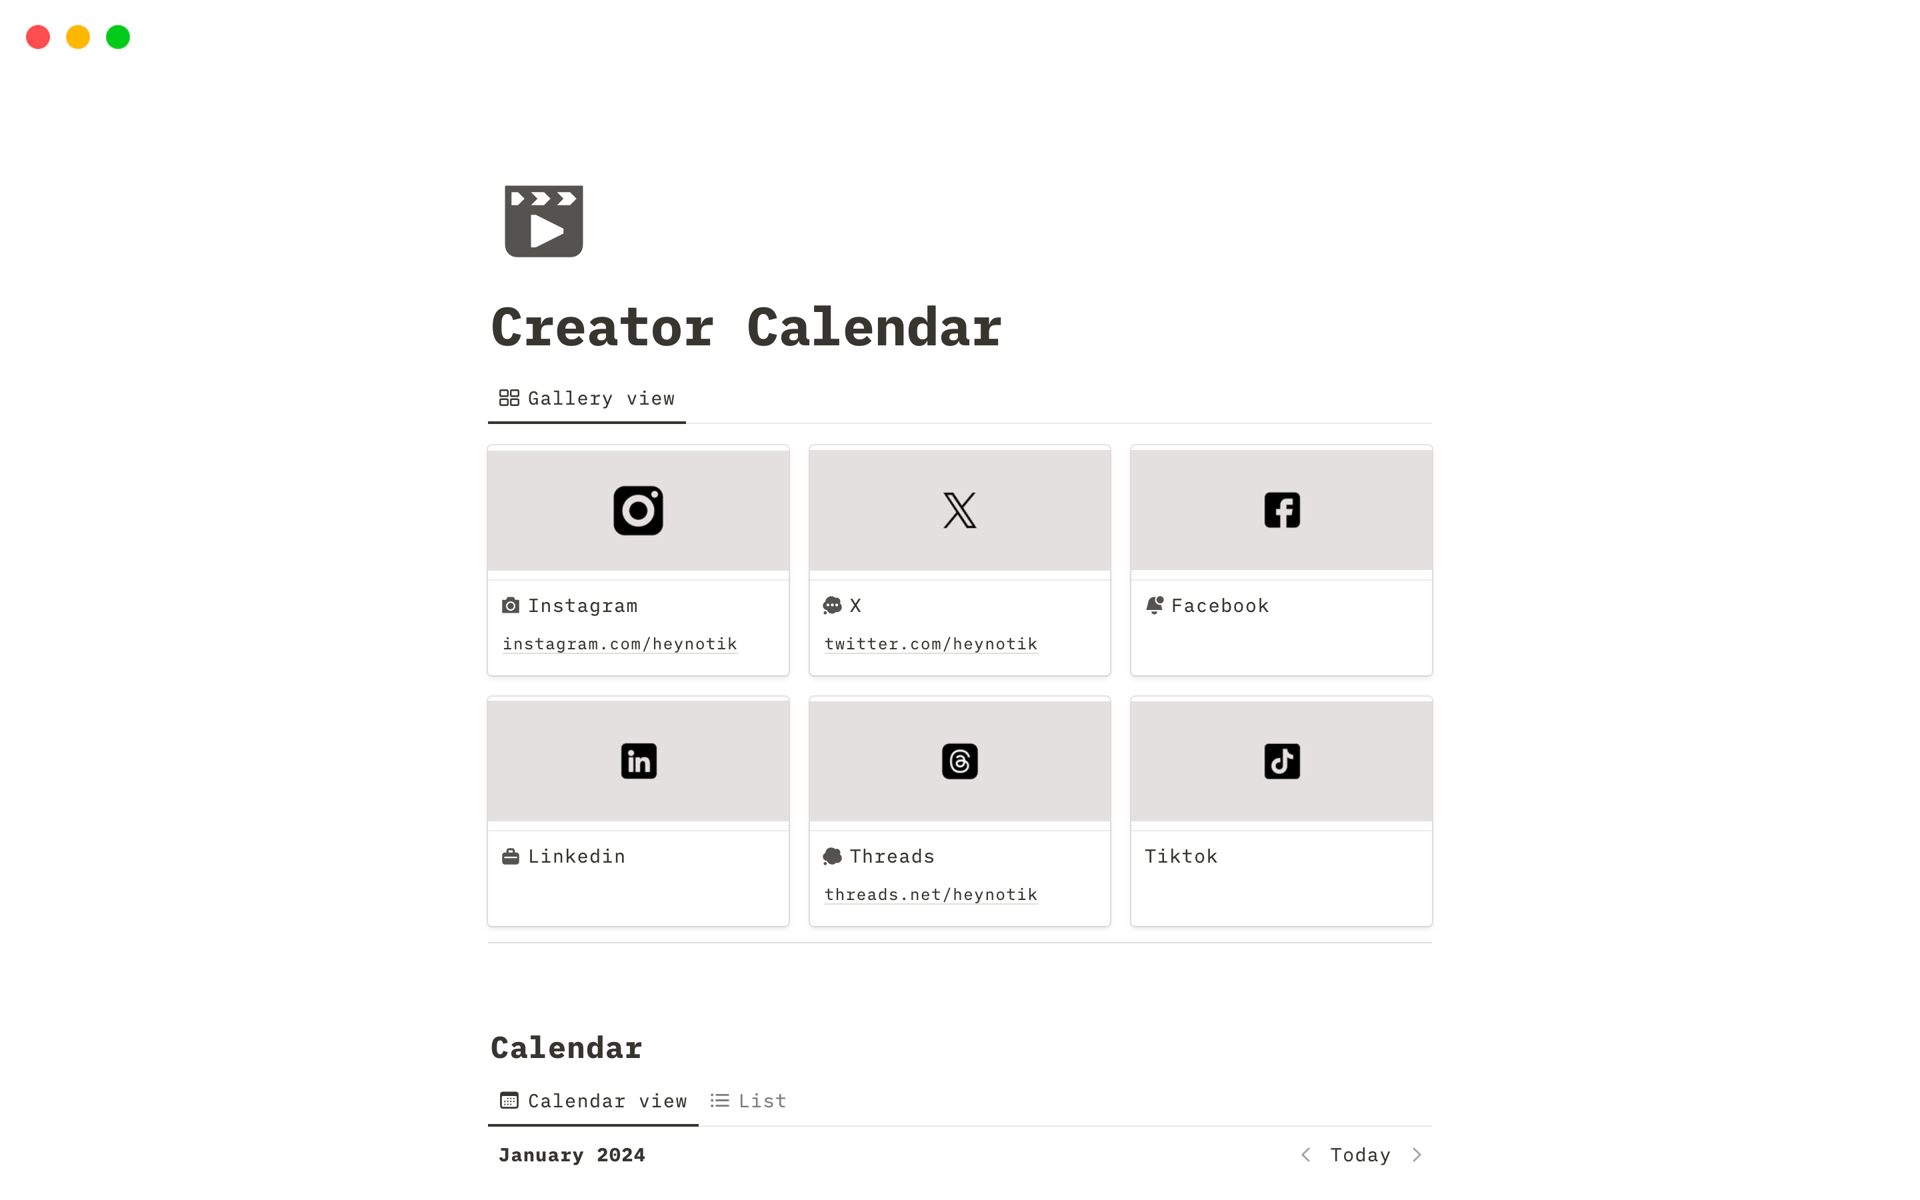 Planning your content in a book the old way or are you stuck in excel? Organise and Plan your content the easy way with Notik Content Calendar.